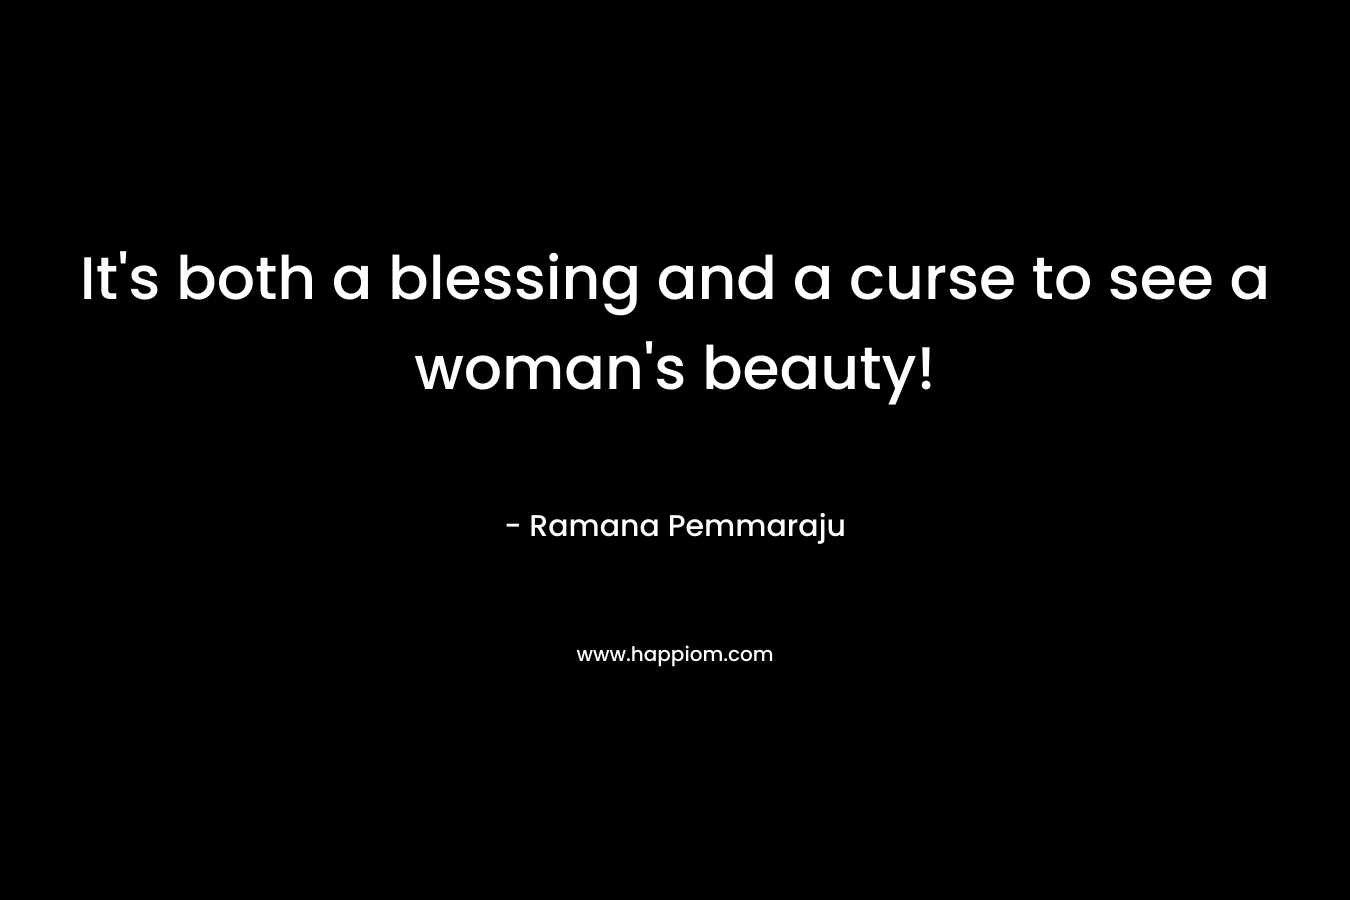 It's both a blessing and a curse to see a woman's beauty!